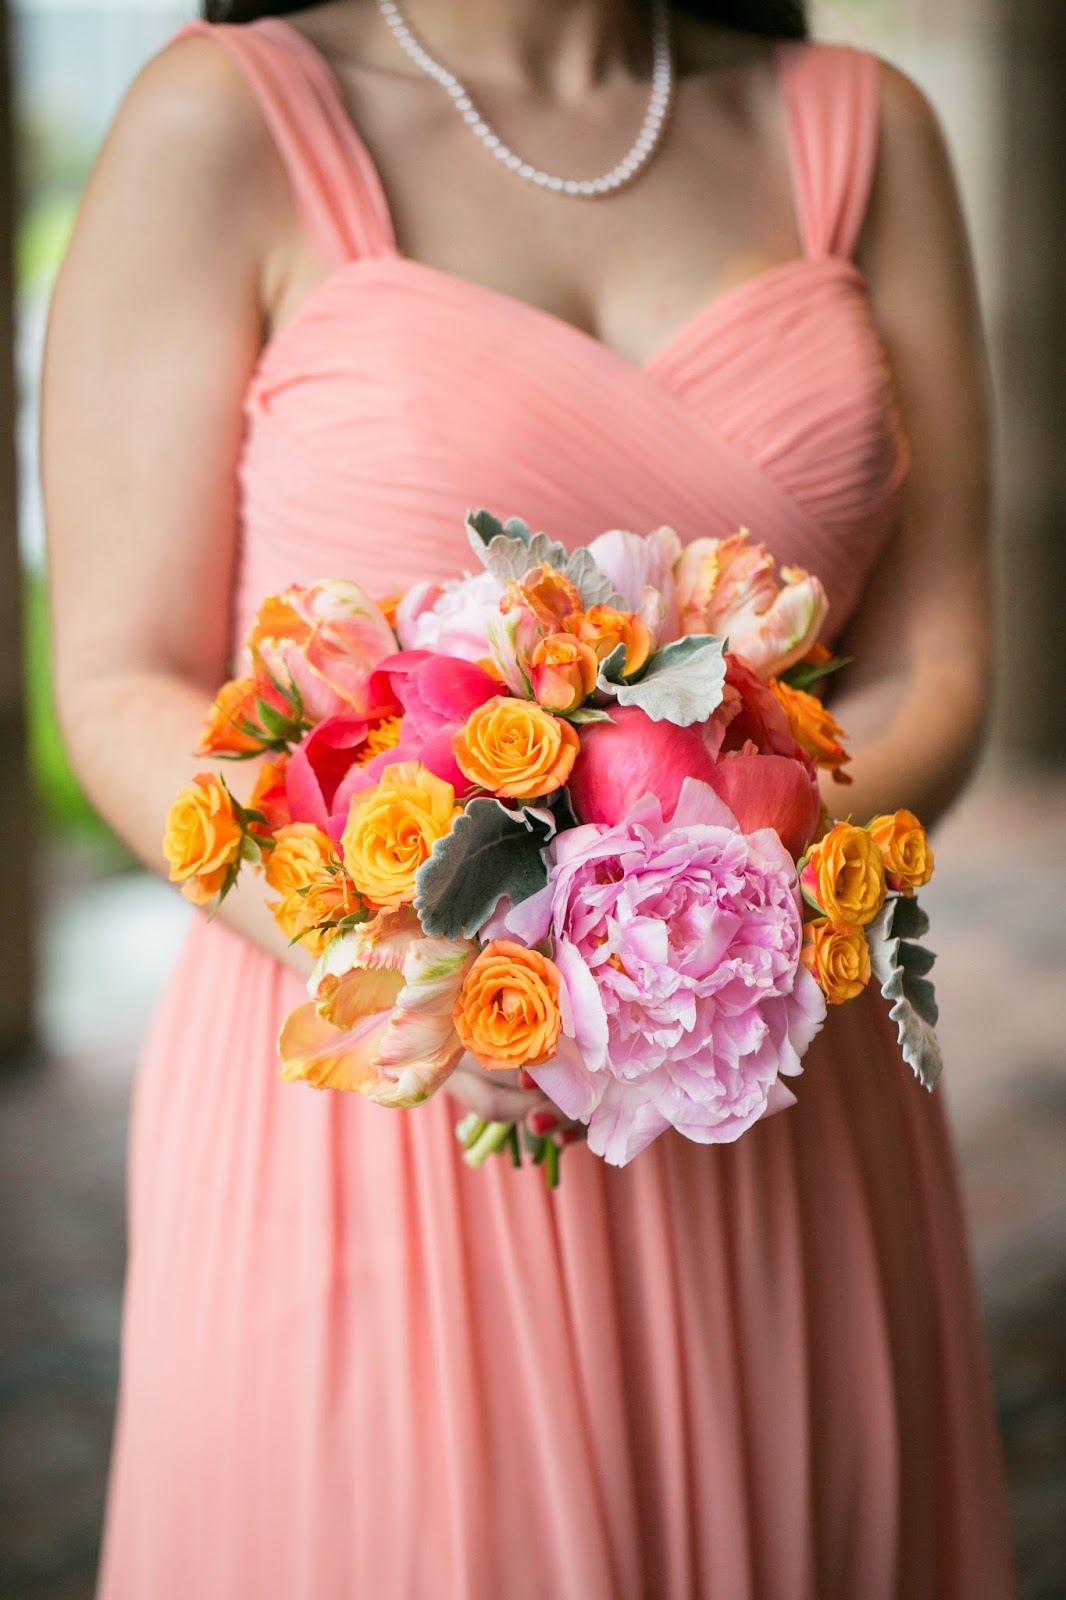 Tracey Reynolds Floral Design: A May Wedding at The Grand Summit Hotel